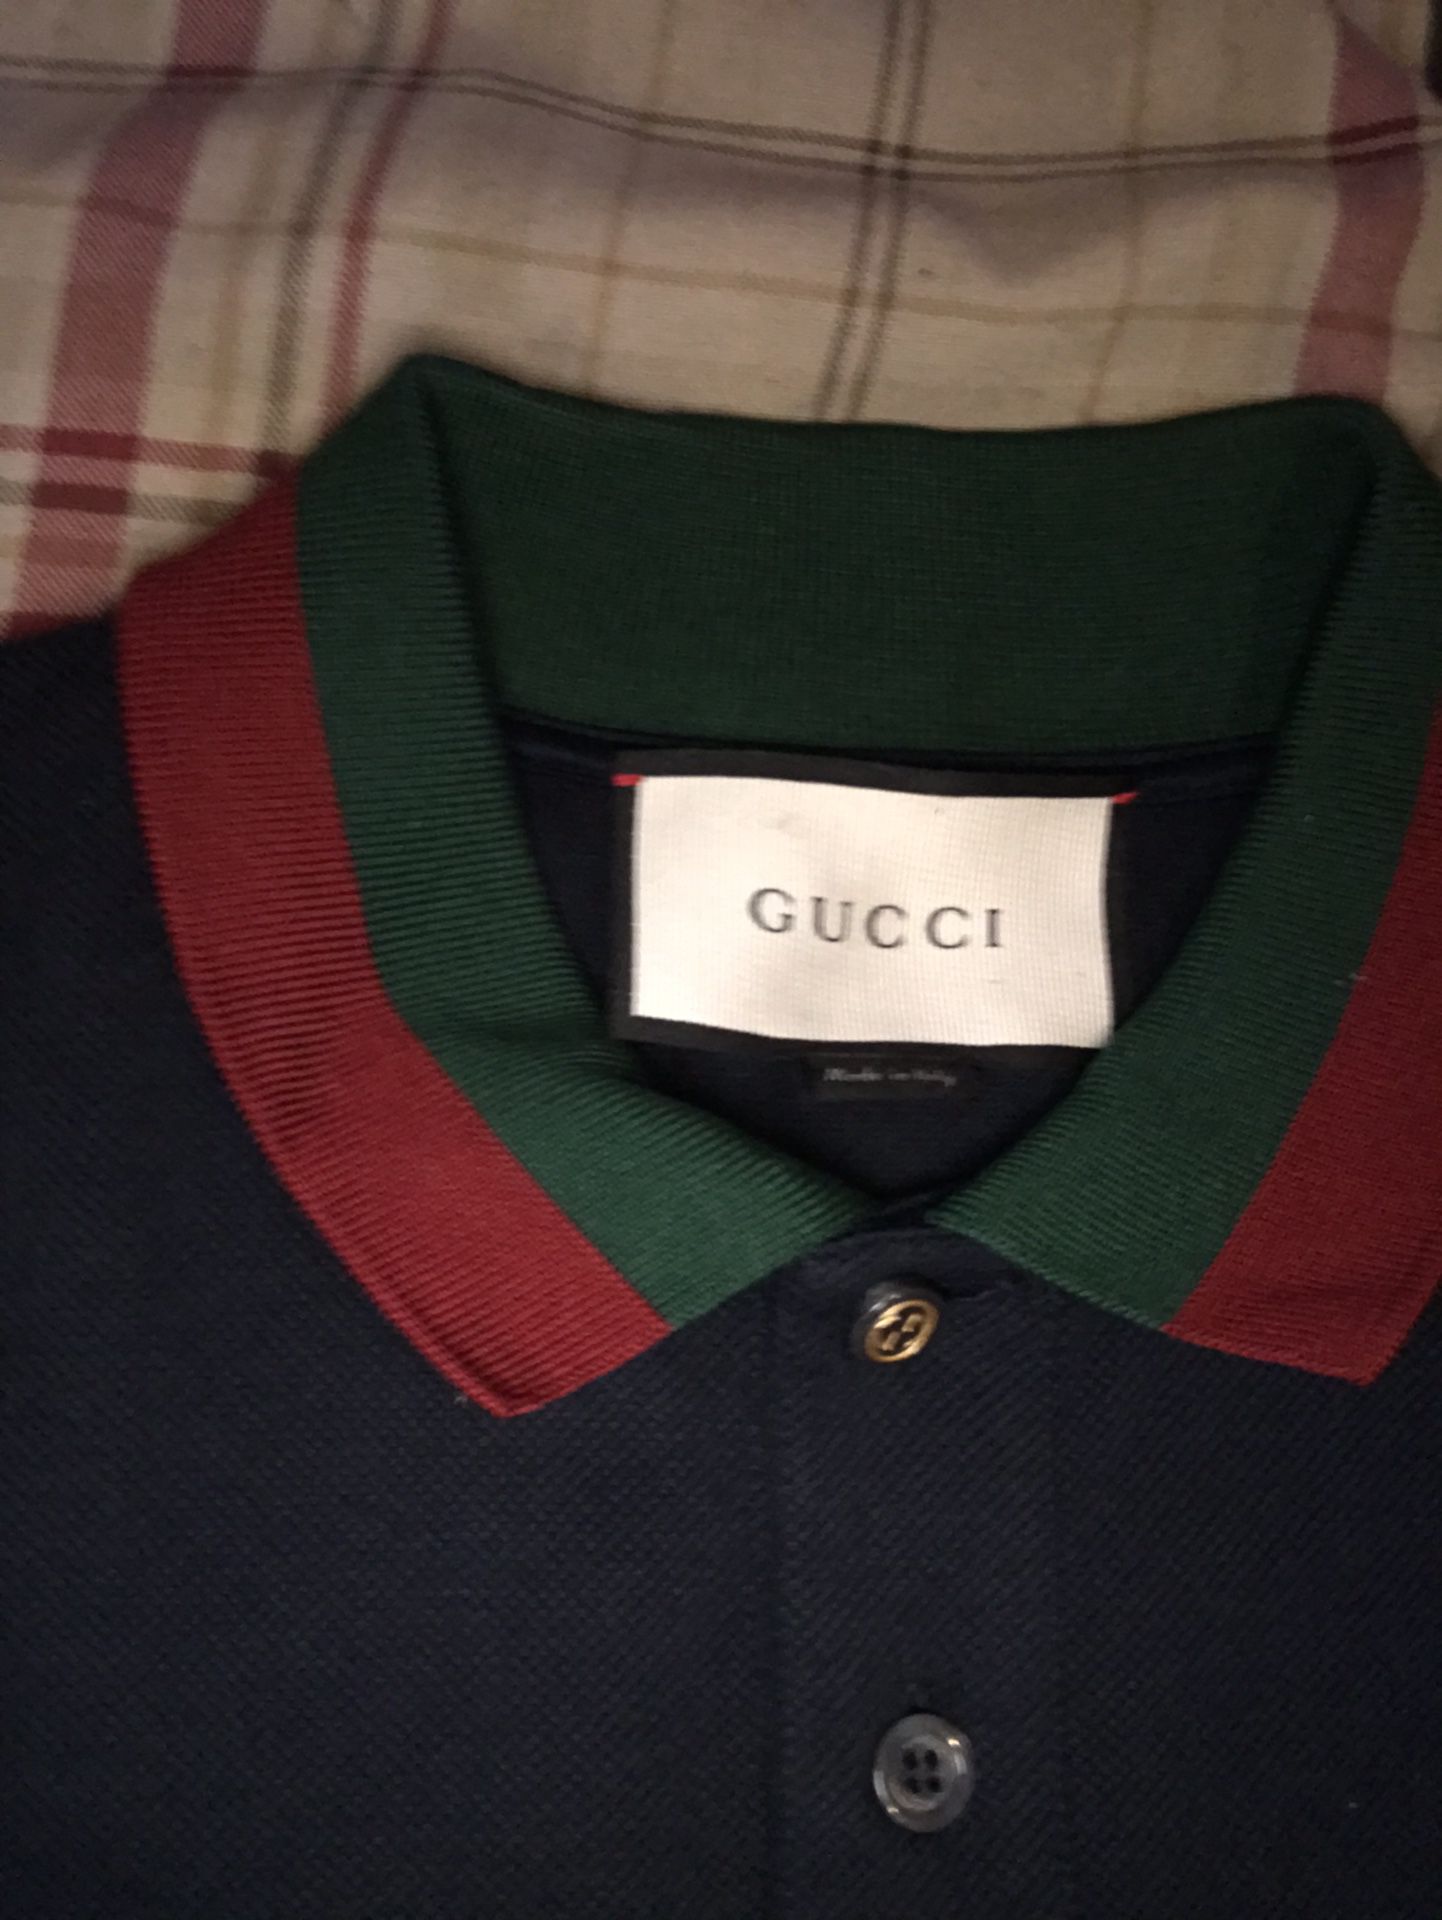 $140 Gucci shirt size large never worn out